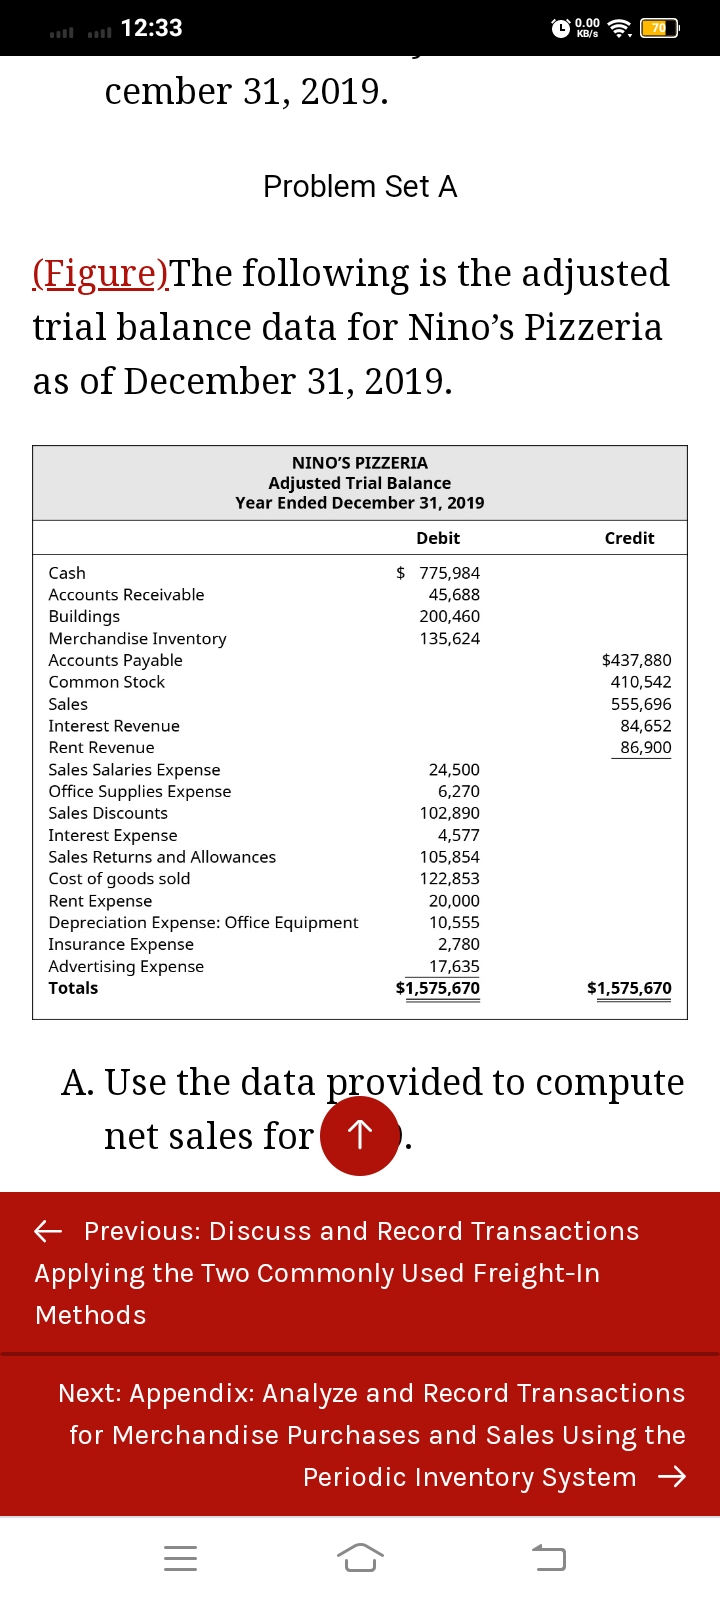 ll uil 12:33
0.00
KB/s
cember 31, 2019.
Problem Set A
(Figure)The following is the adjusted
trial balance data for Nino's Pizzeria
as of December 31, 2019.
PIZZERIA
Adjusted Trial Balance
Year Ended December 31, 2019
Debit
Credit
Cash
$ 775,984
Accounts Receivable
45,688
Buildings
Merchandise Inventory
200,460
135,624
Accounts Payable
$437,880
Common Stock
410,542
Sales
555,696
Interest Revenue
84,652
86,900
Rent Revenue
Sales Salaries Expense
24,500
Office Supplies Expense
6,270
Sales Discounts
102,890
Interest Expense
Sales Returns and Allowances
4,577
105,854
Cost of goods sold
Rent Expense
122,853
20,000
Depreciation Expense: Office Equipment
Insurance Expense
Advertising Expense
10,555
2,780
17,635
Totals
$1,575,670
$1,575,670
A. Use the data provided to compute
net sales for
E Previous: Discuss and Record Transactions
Applying the Two Commonly Used Freight-In
Methods
Next: Appendix: Analyze and Record Transactions
for Merchandise Purchases and Sales Using the
Periodic Inventory System →
